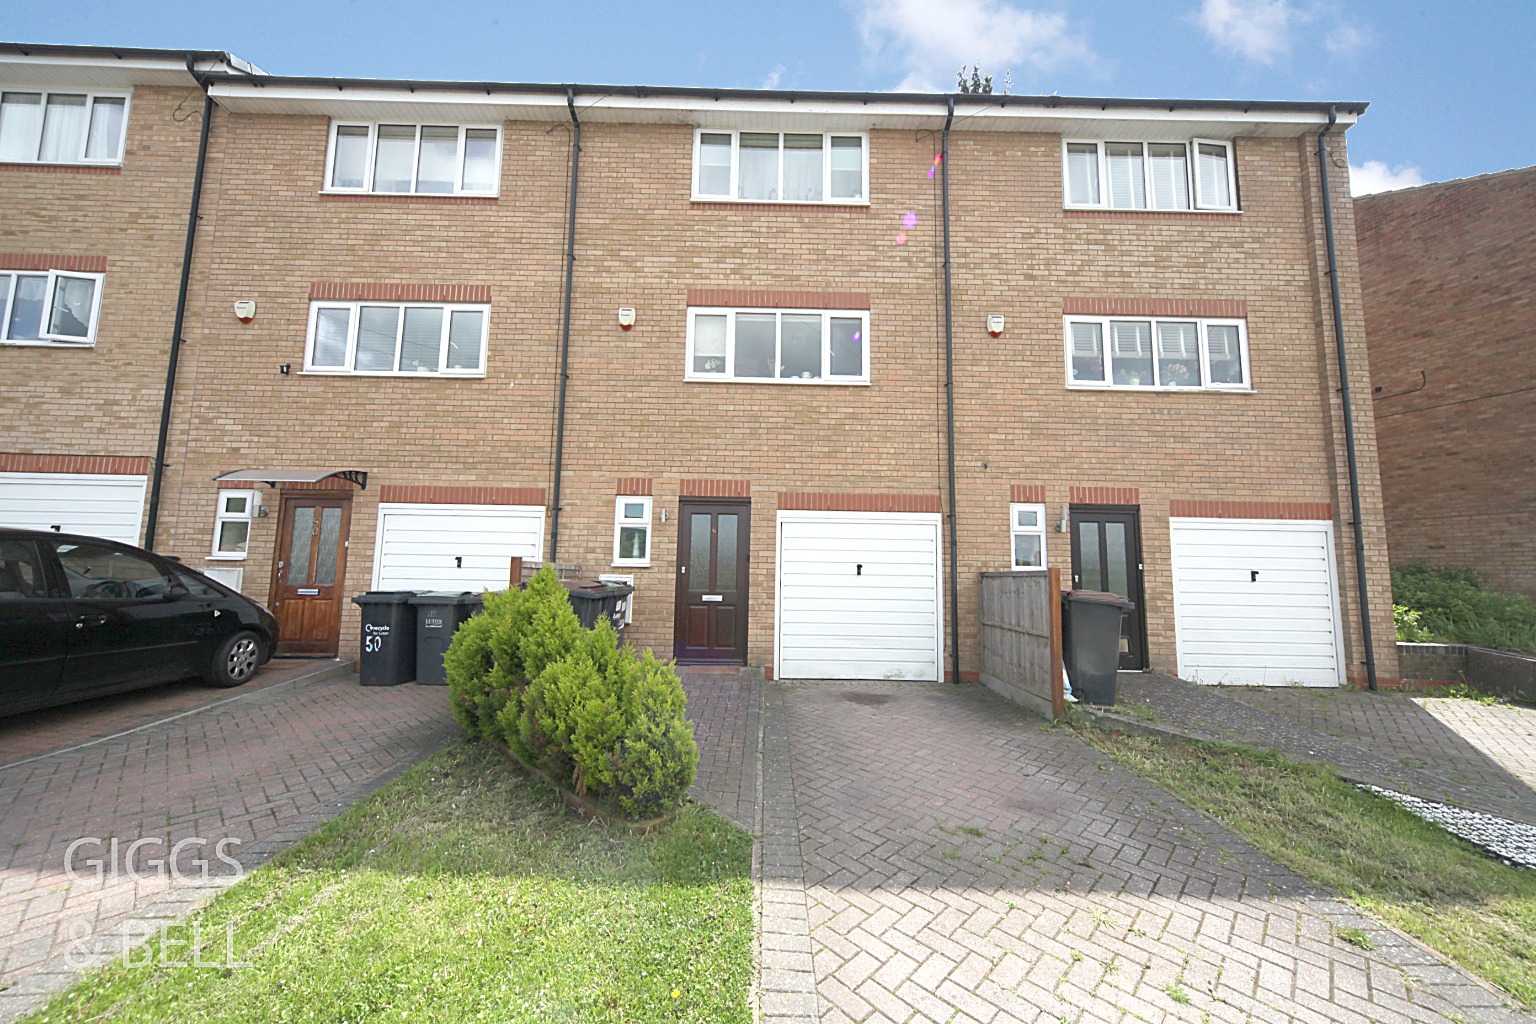 2 bed terraced house for sale in Fermor Crescent, Luton, LU2 